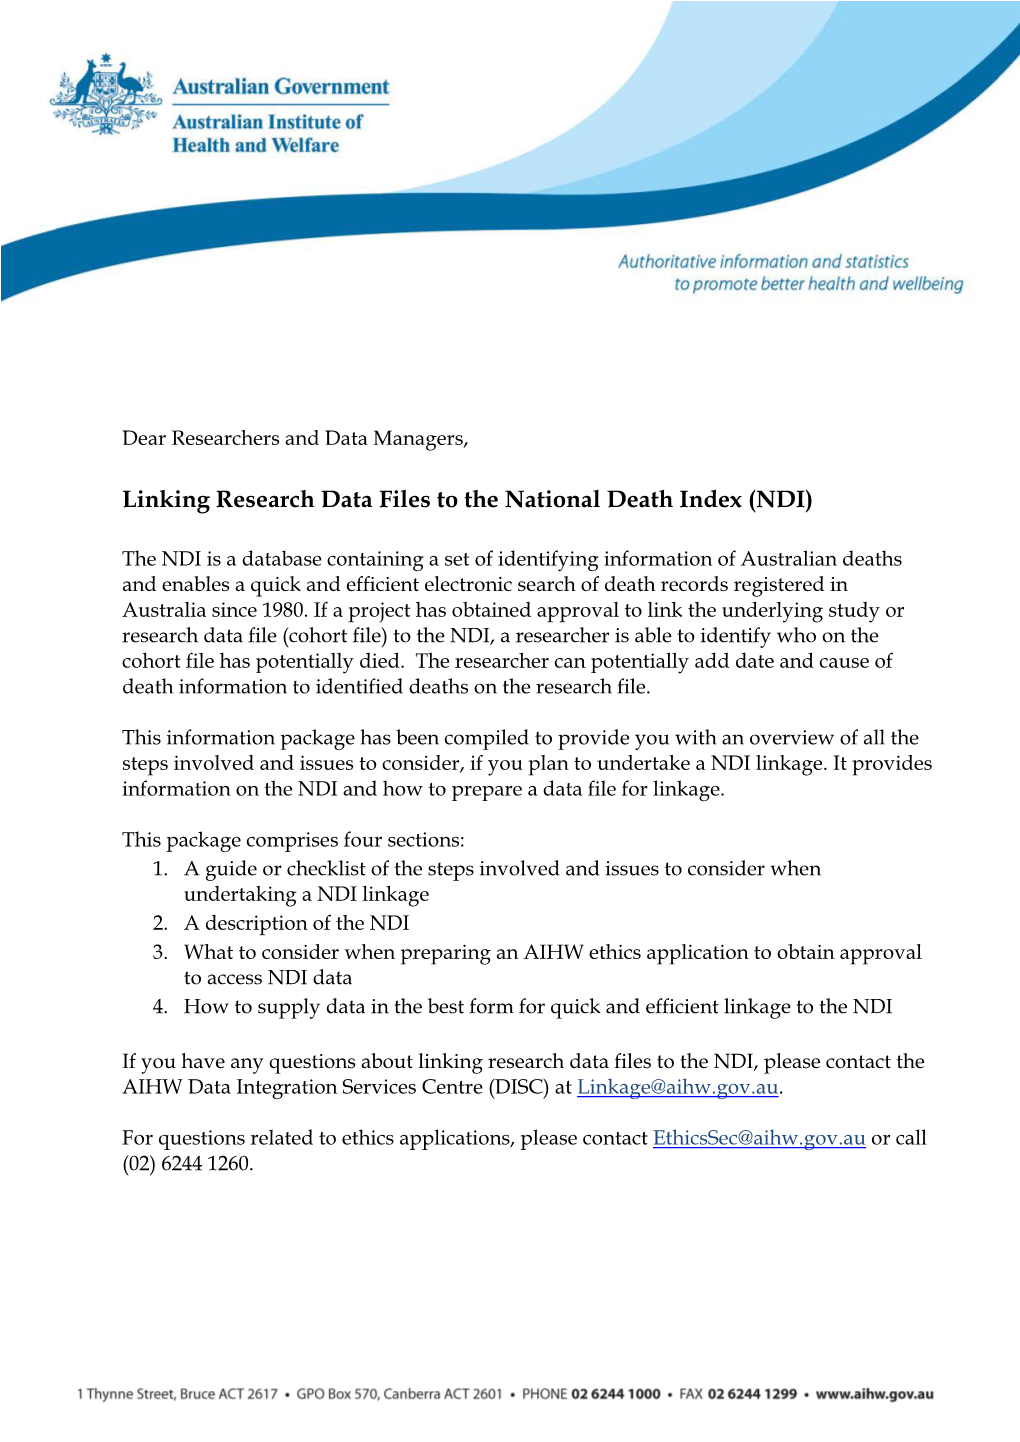 National Death Index (NDI) Data Provision Package (AIHW)